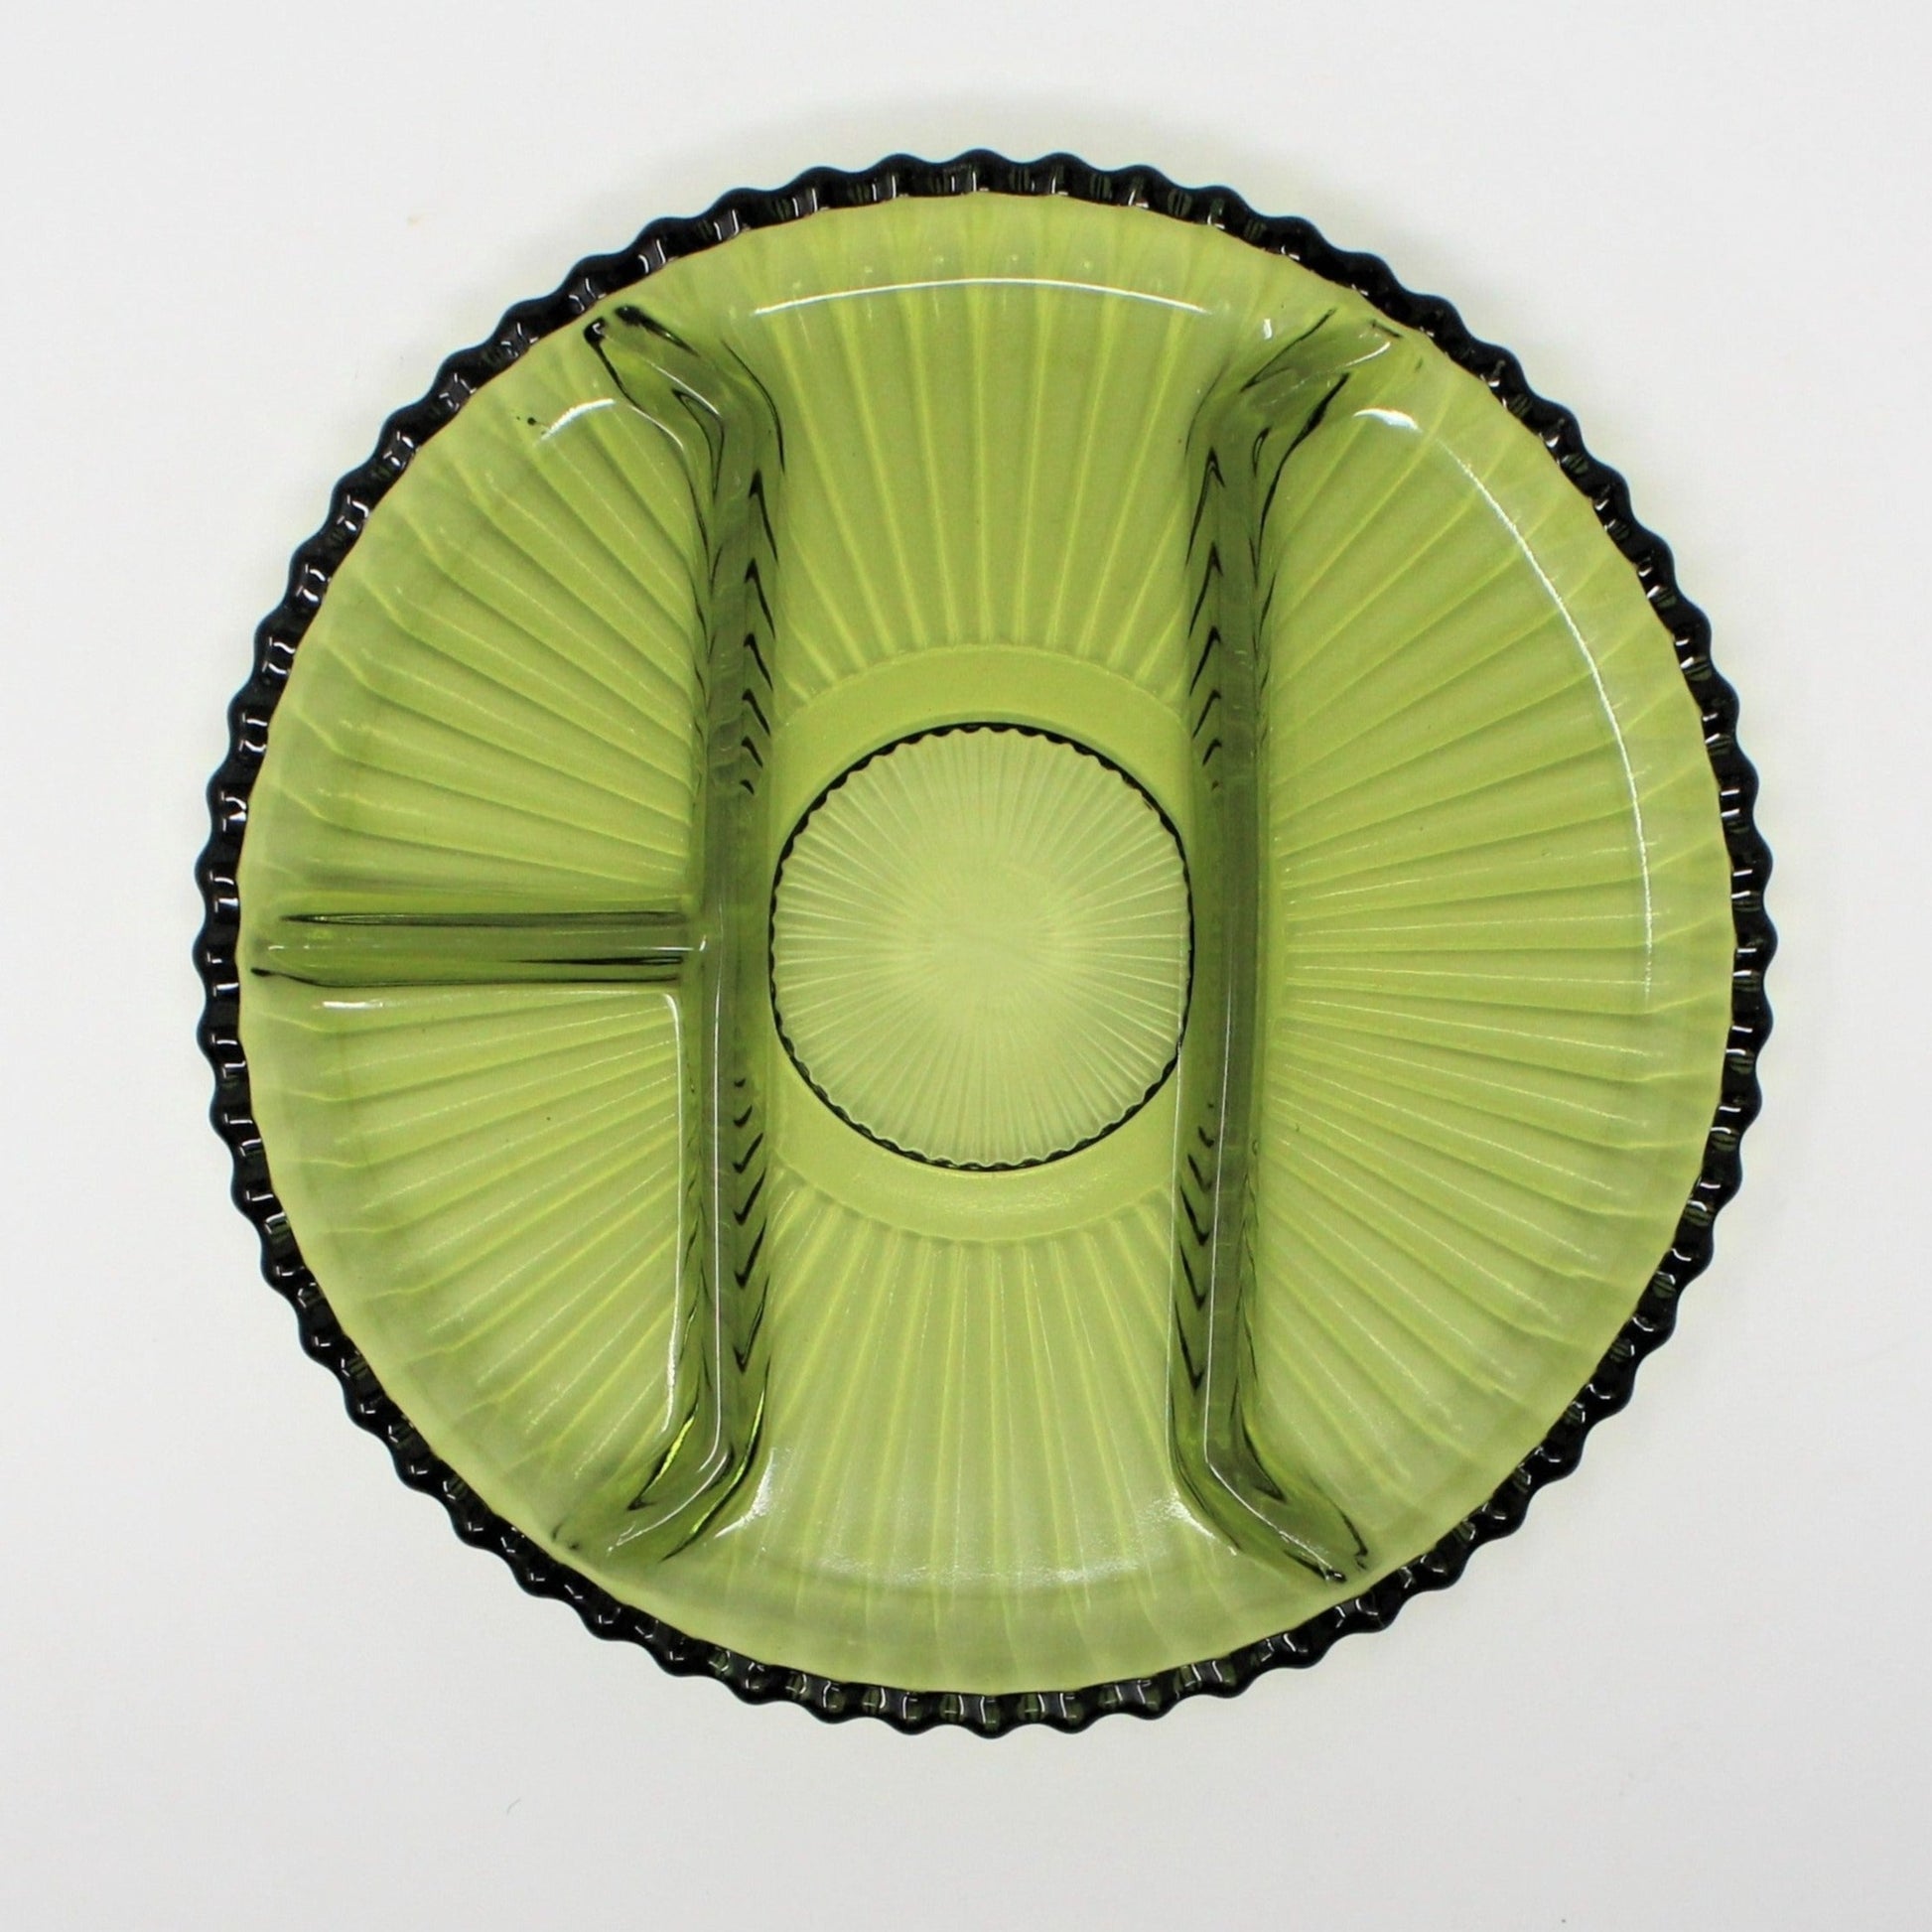 Vintage Indiana Glass Green Divided Serving Dish, 4 Sections